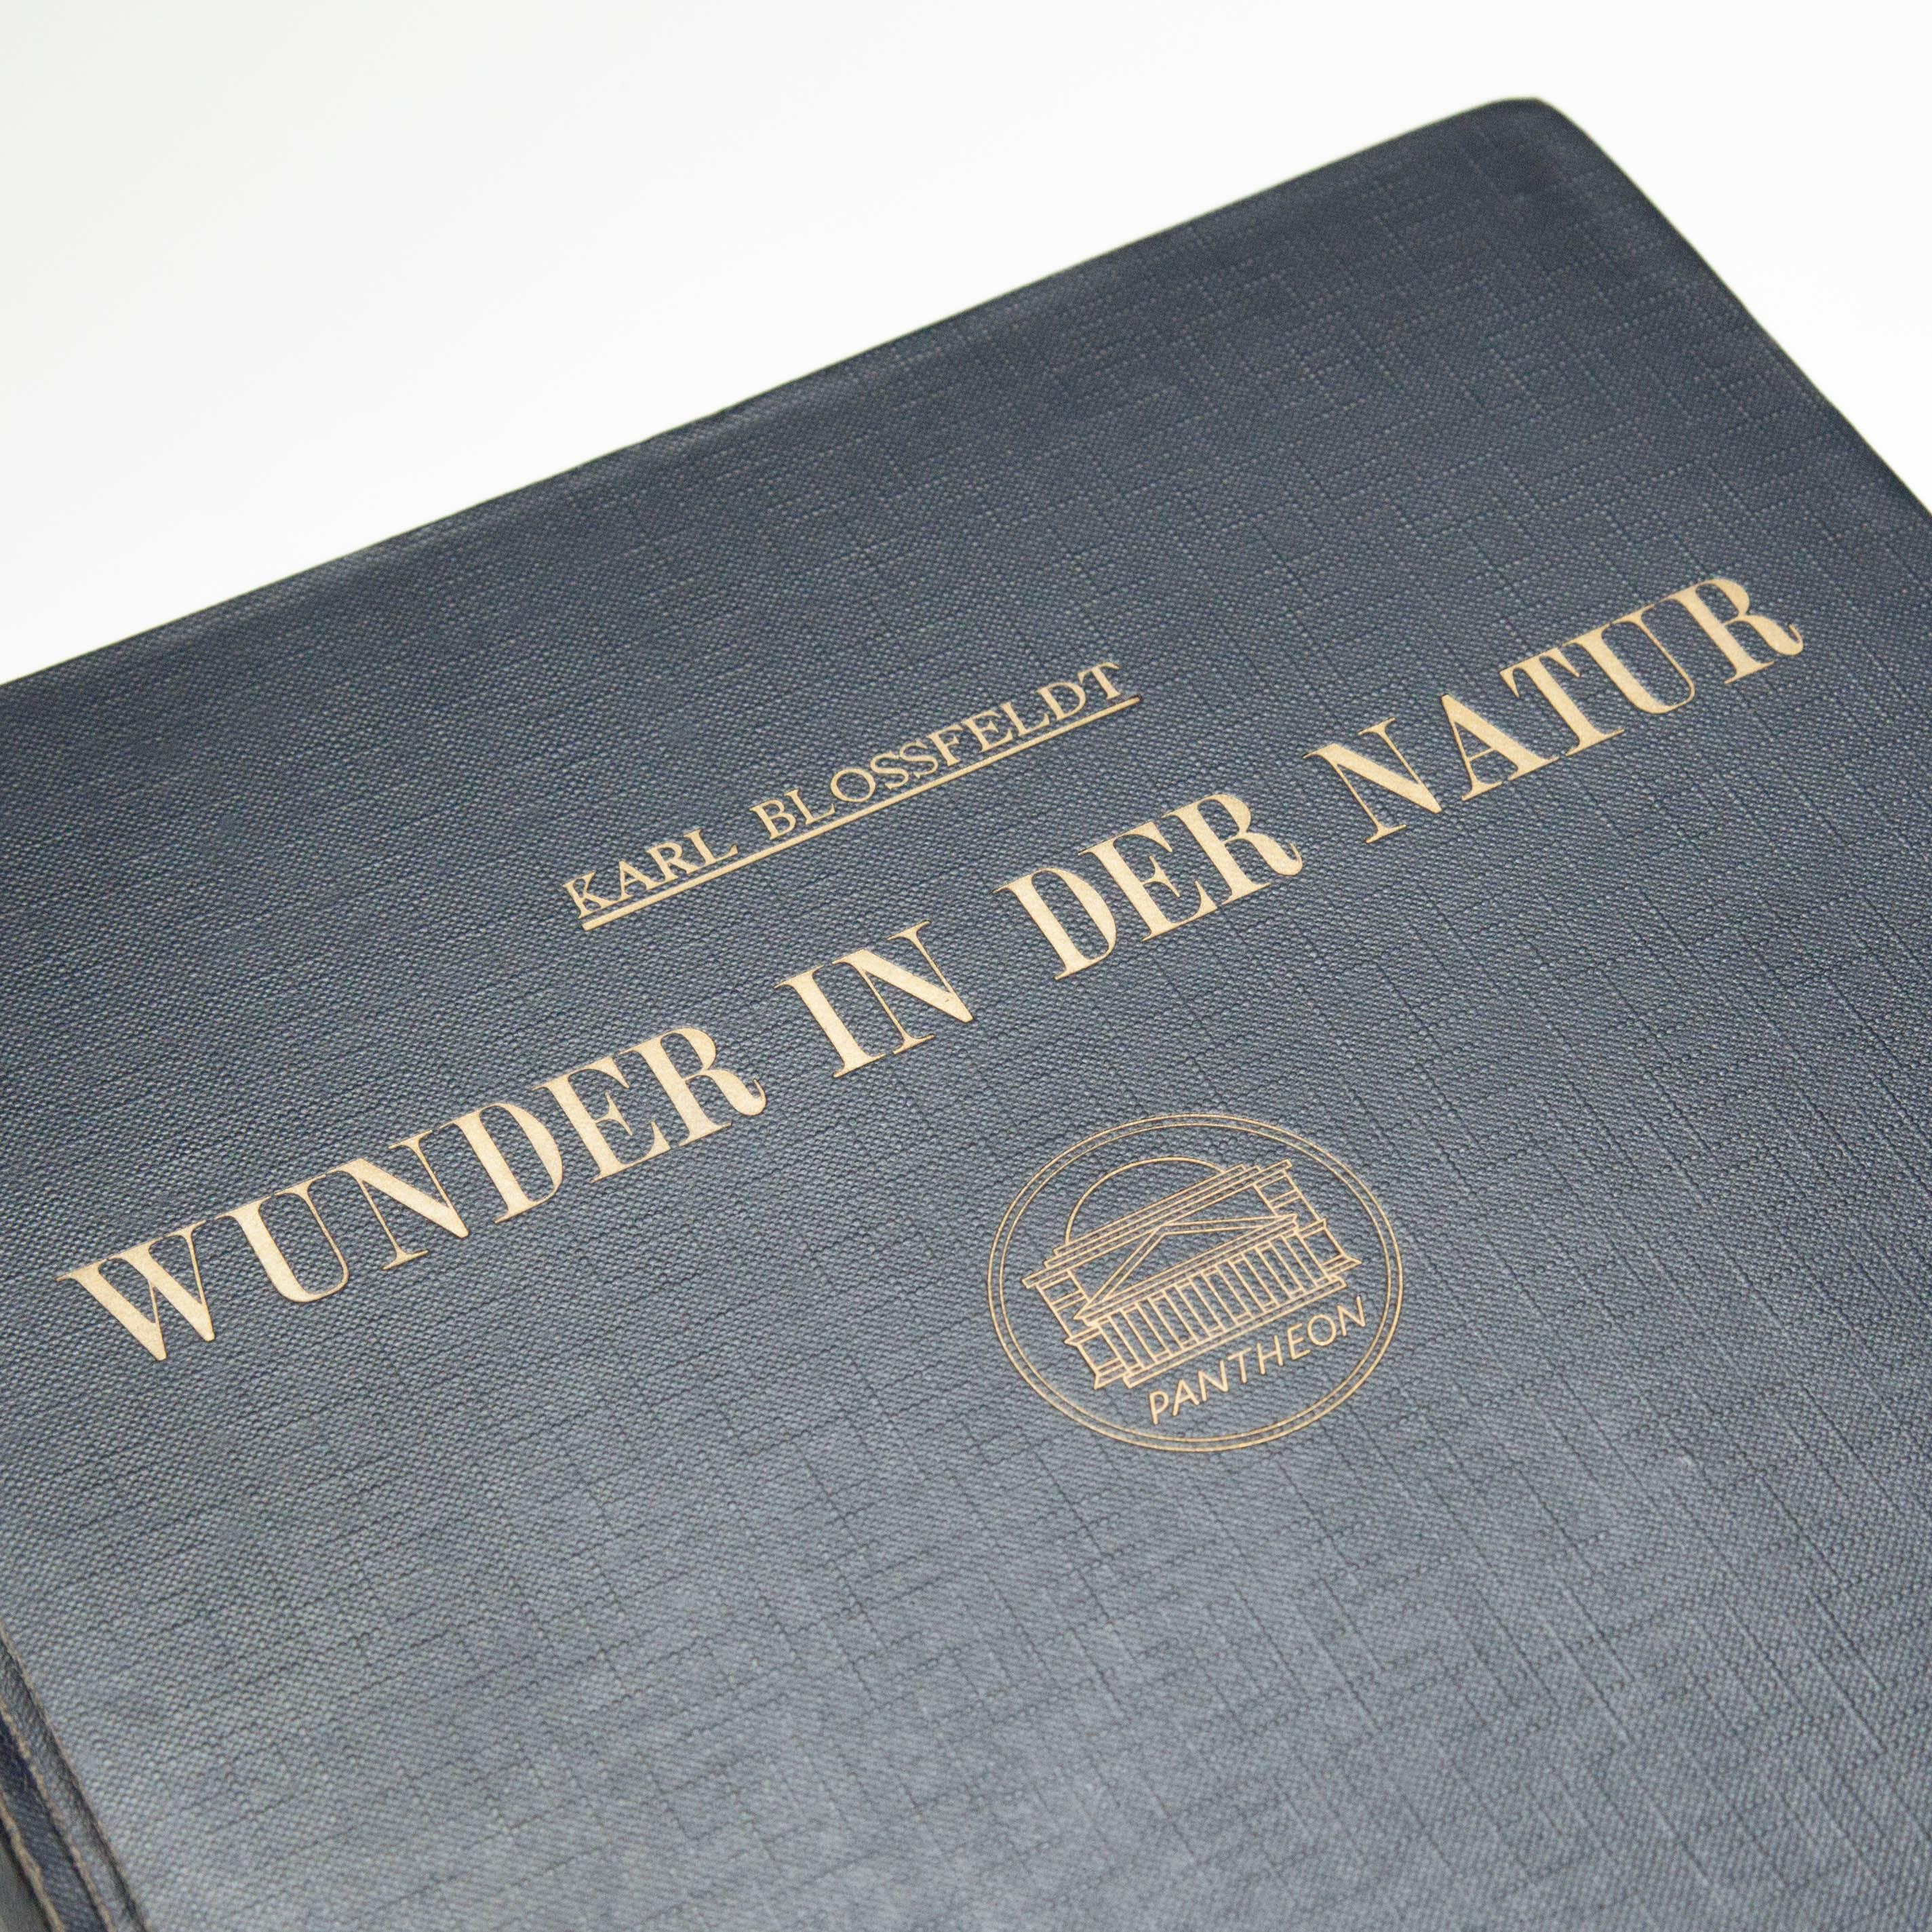 'Urformen Der Kunst' book by Karl Blossfeldt.
Published by H. Schmidt & C. Günther in Leipzig (Germany).

First edition of 1942 with 250 pages and 120 plates in copper gravure after photographs by Karl Blossfeldt.

Original blue binding with